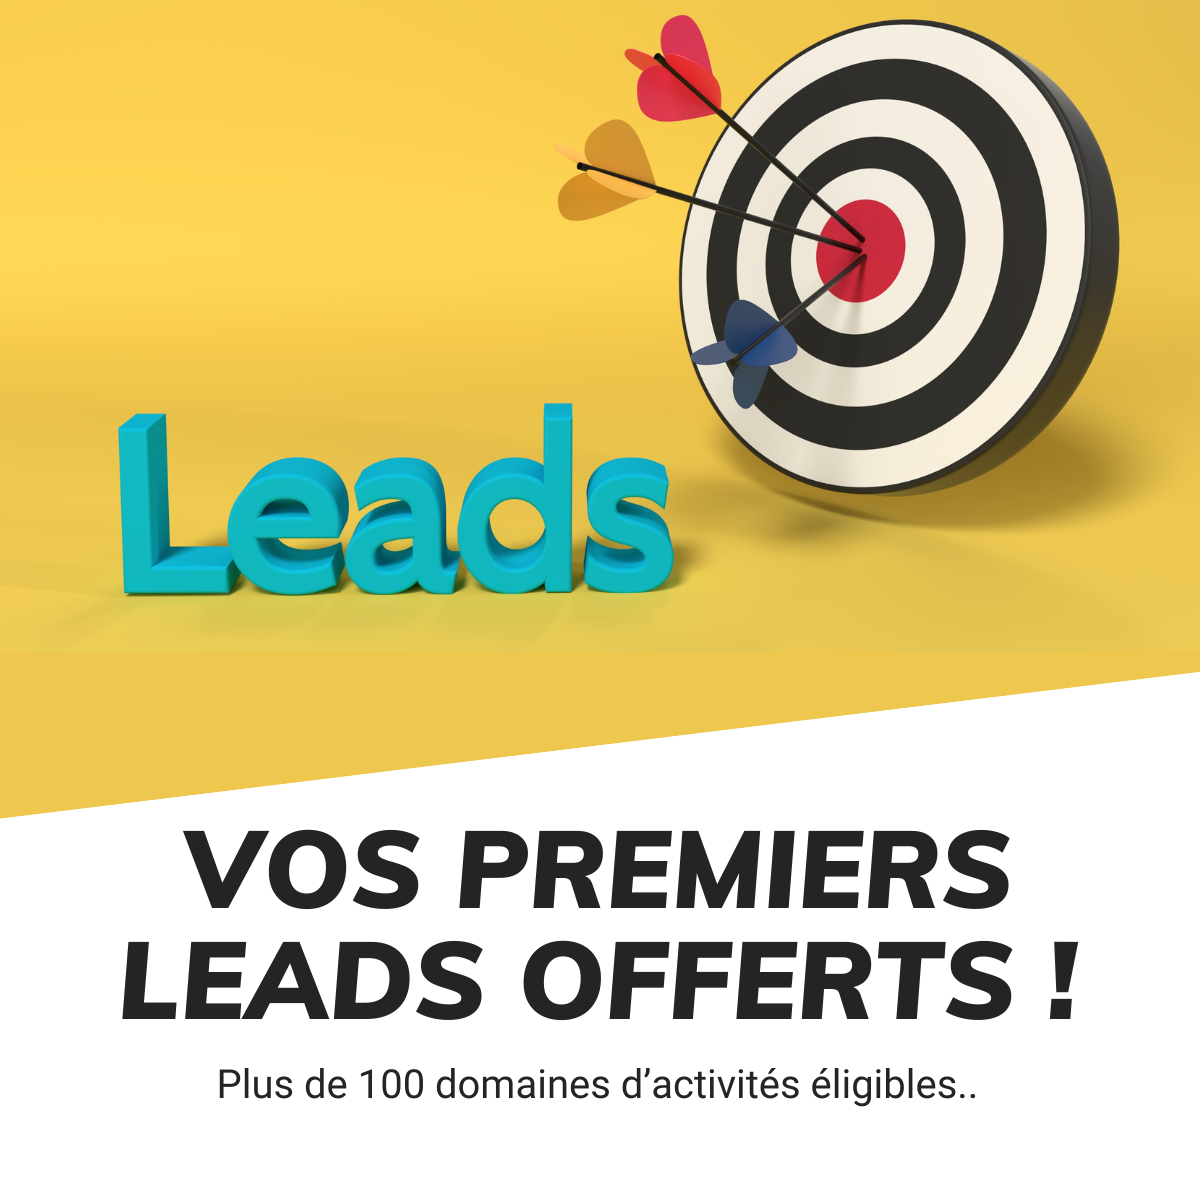 Vos Premiers Leads Offerts